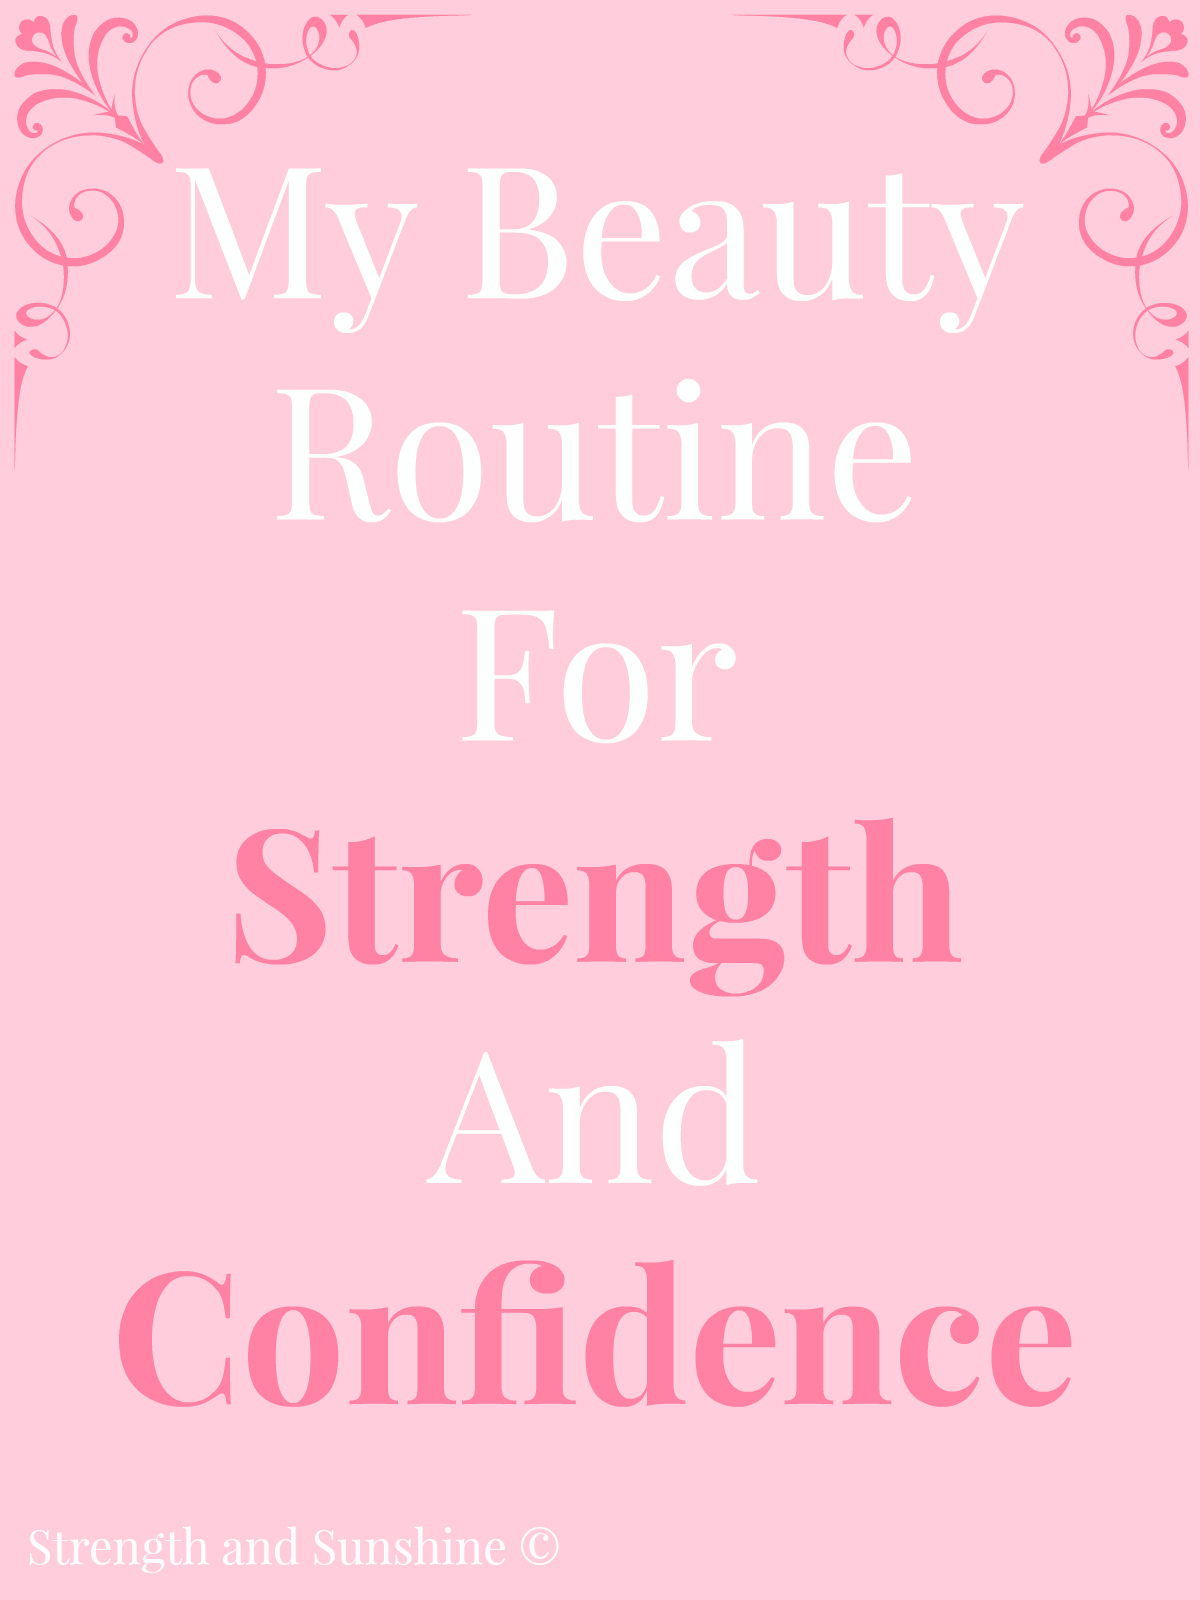 My Beauty Routine For Strength And Confidence ! Strength and Sunshine @RebeccaGF666